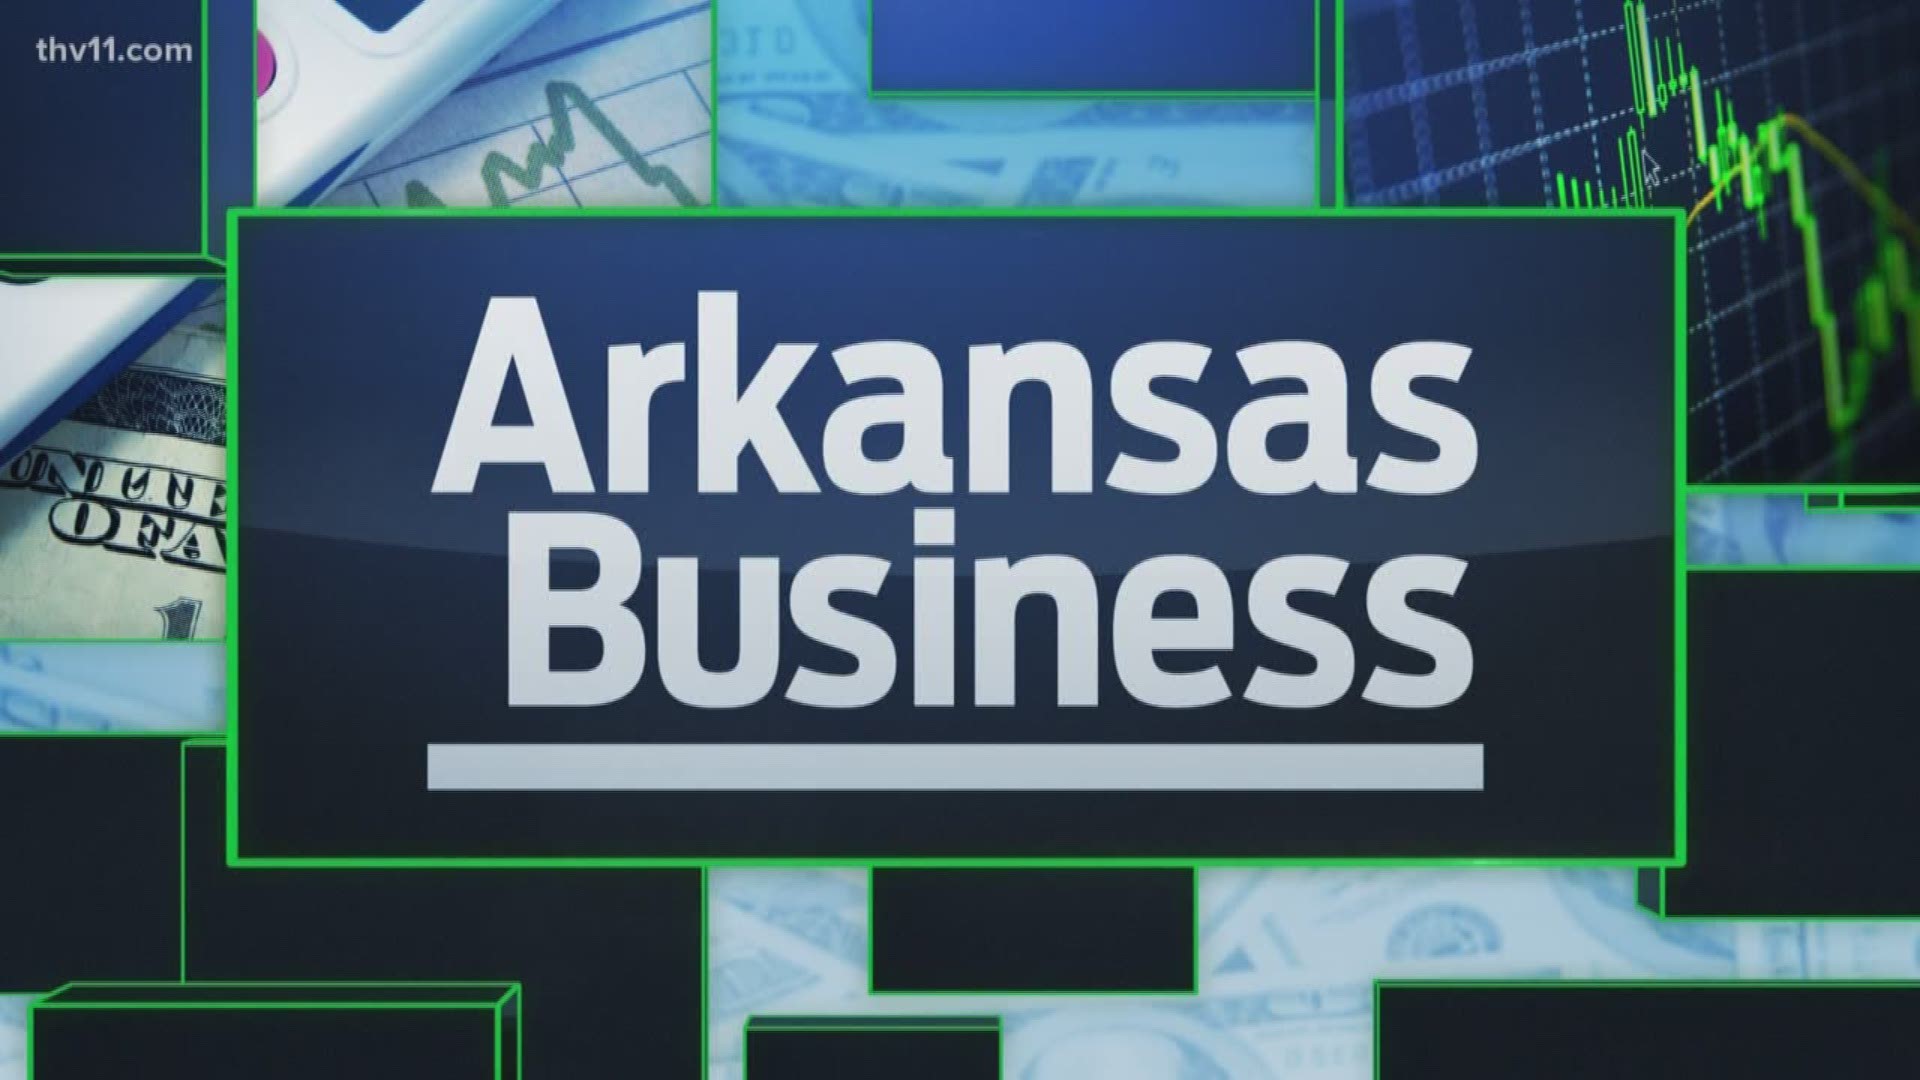 Lance Turner with Arkansas Business has your headlines for Friday, November 10